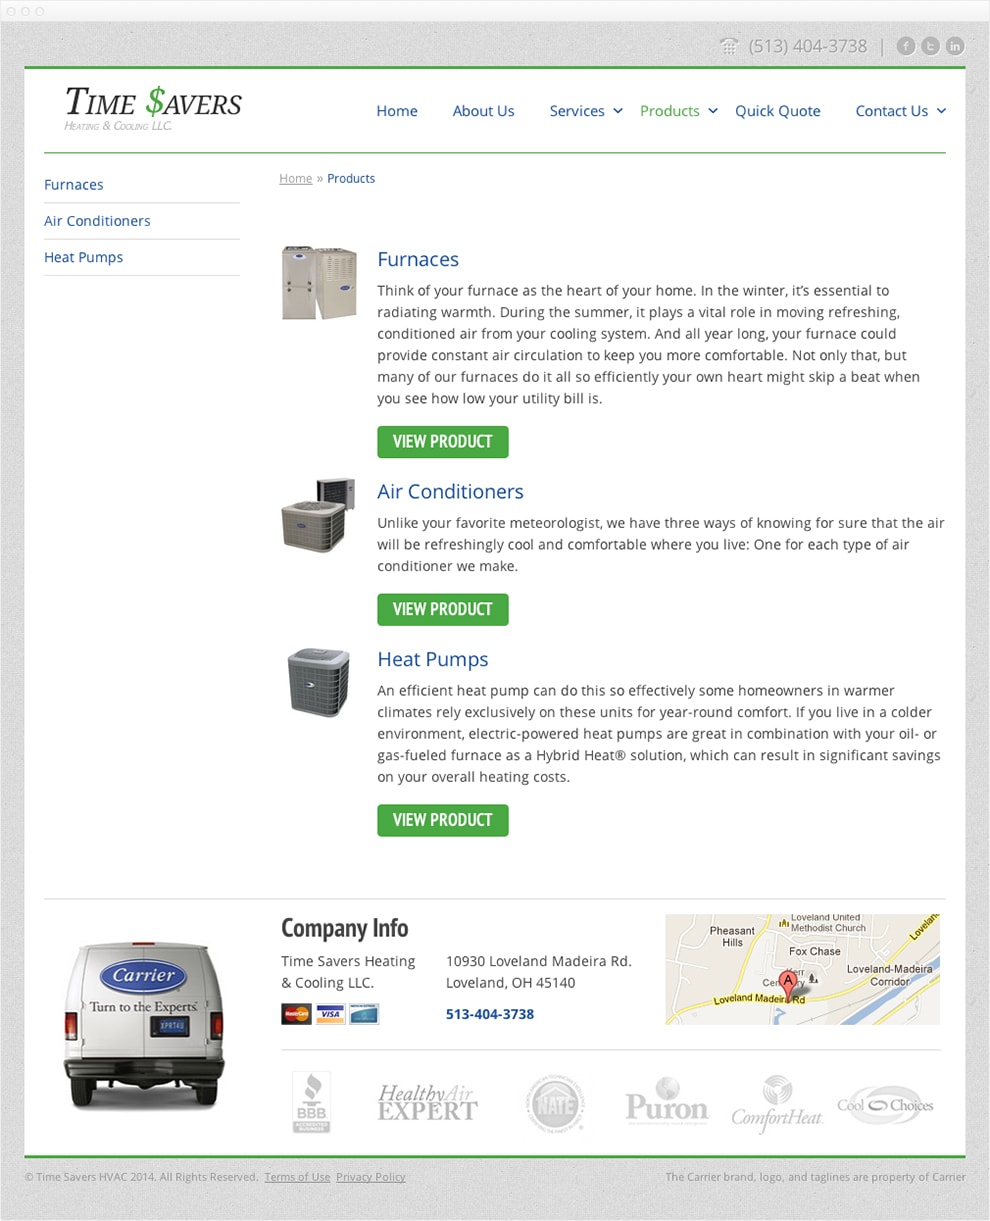 Screen capture of the Time $avers products page.